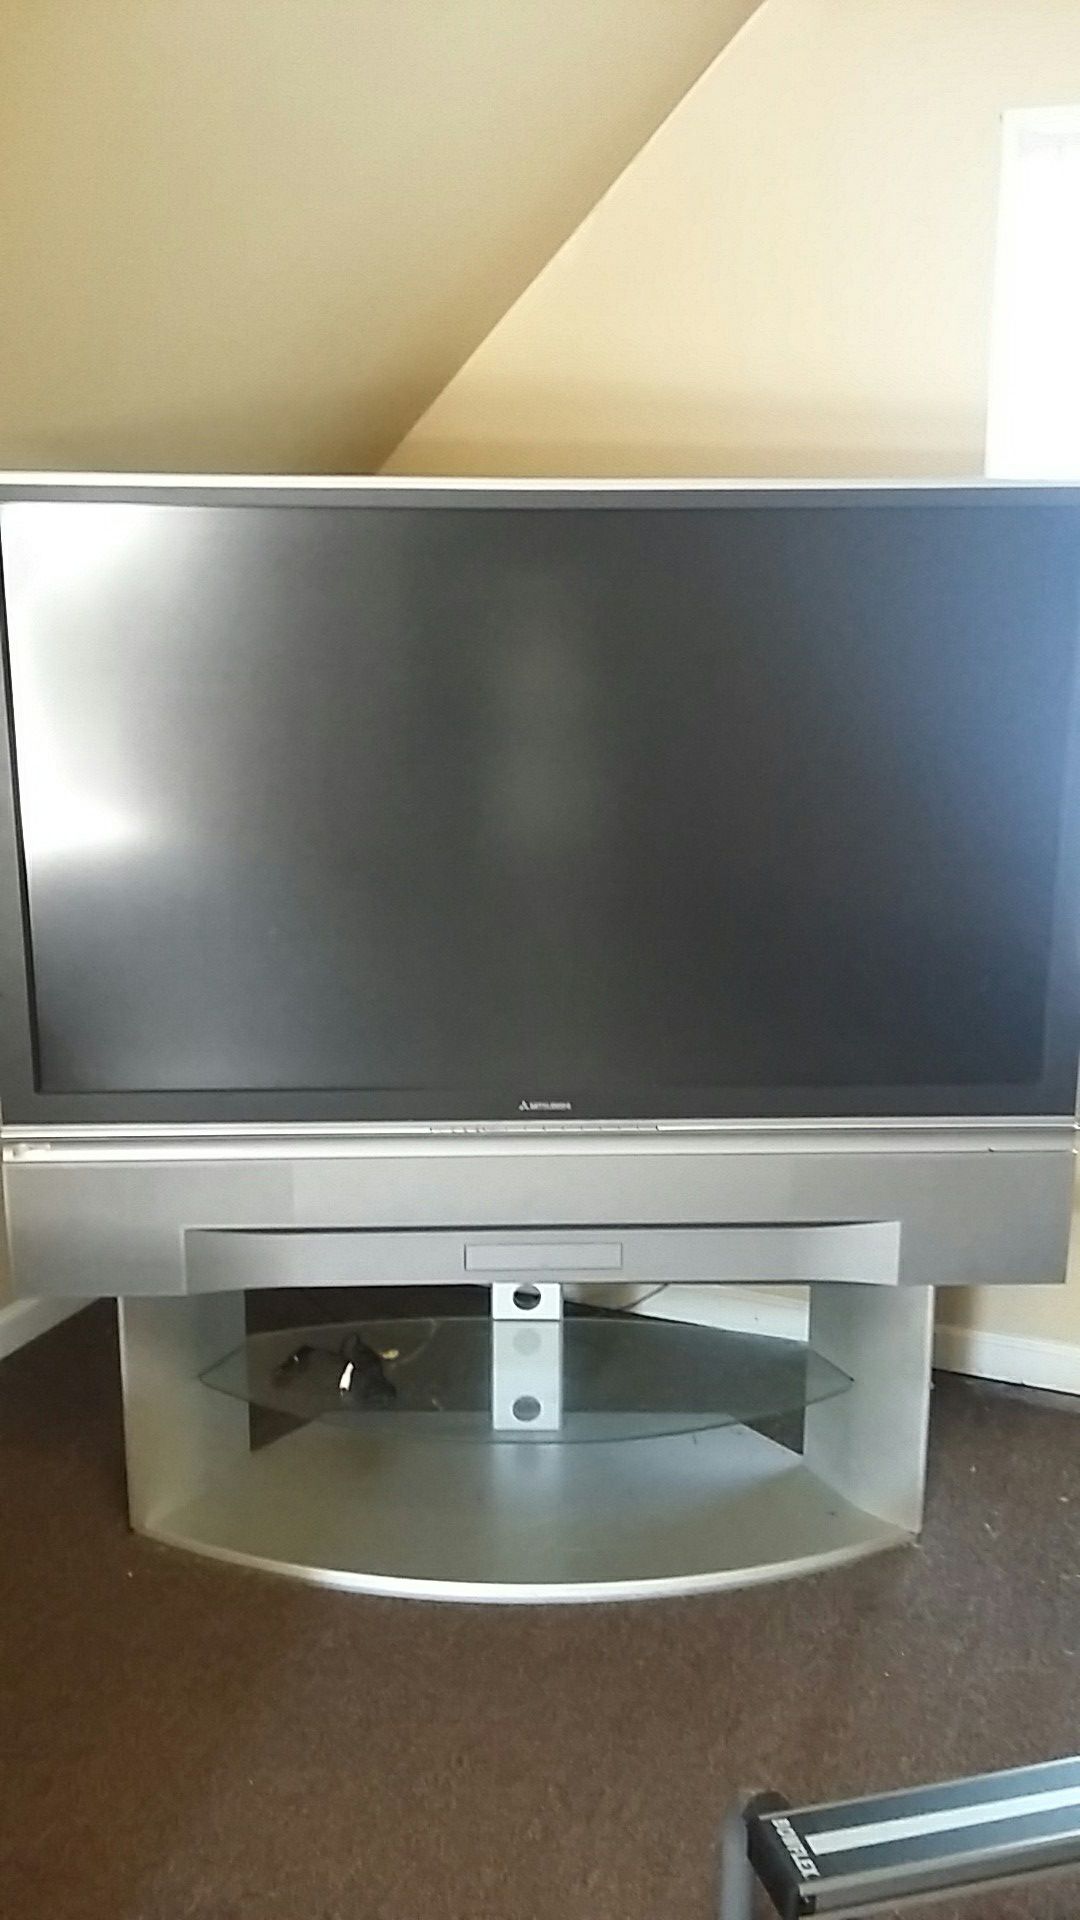 65in Mitsubishi projection TV brand new bulb works great $50